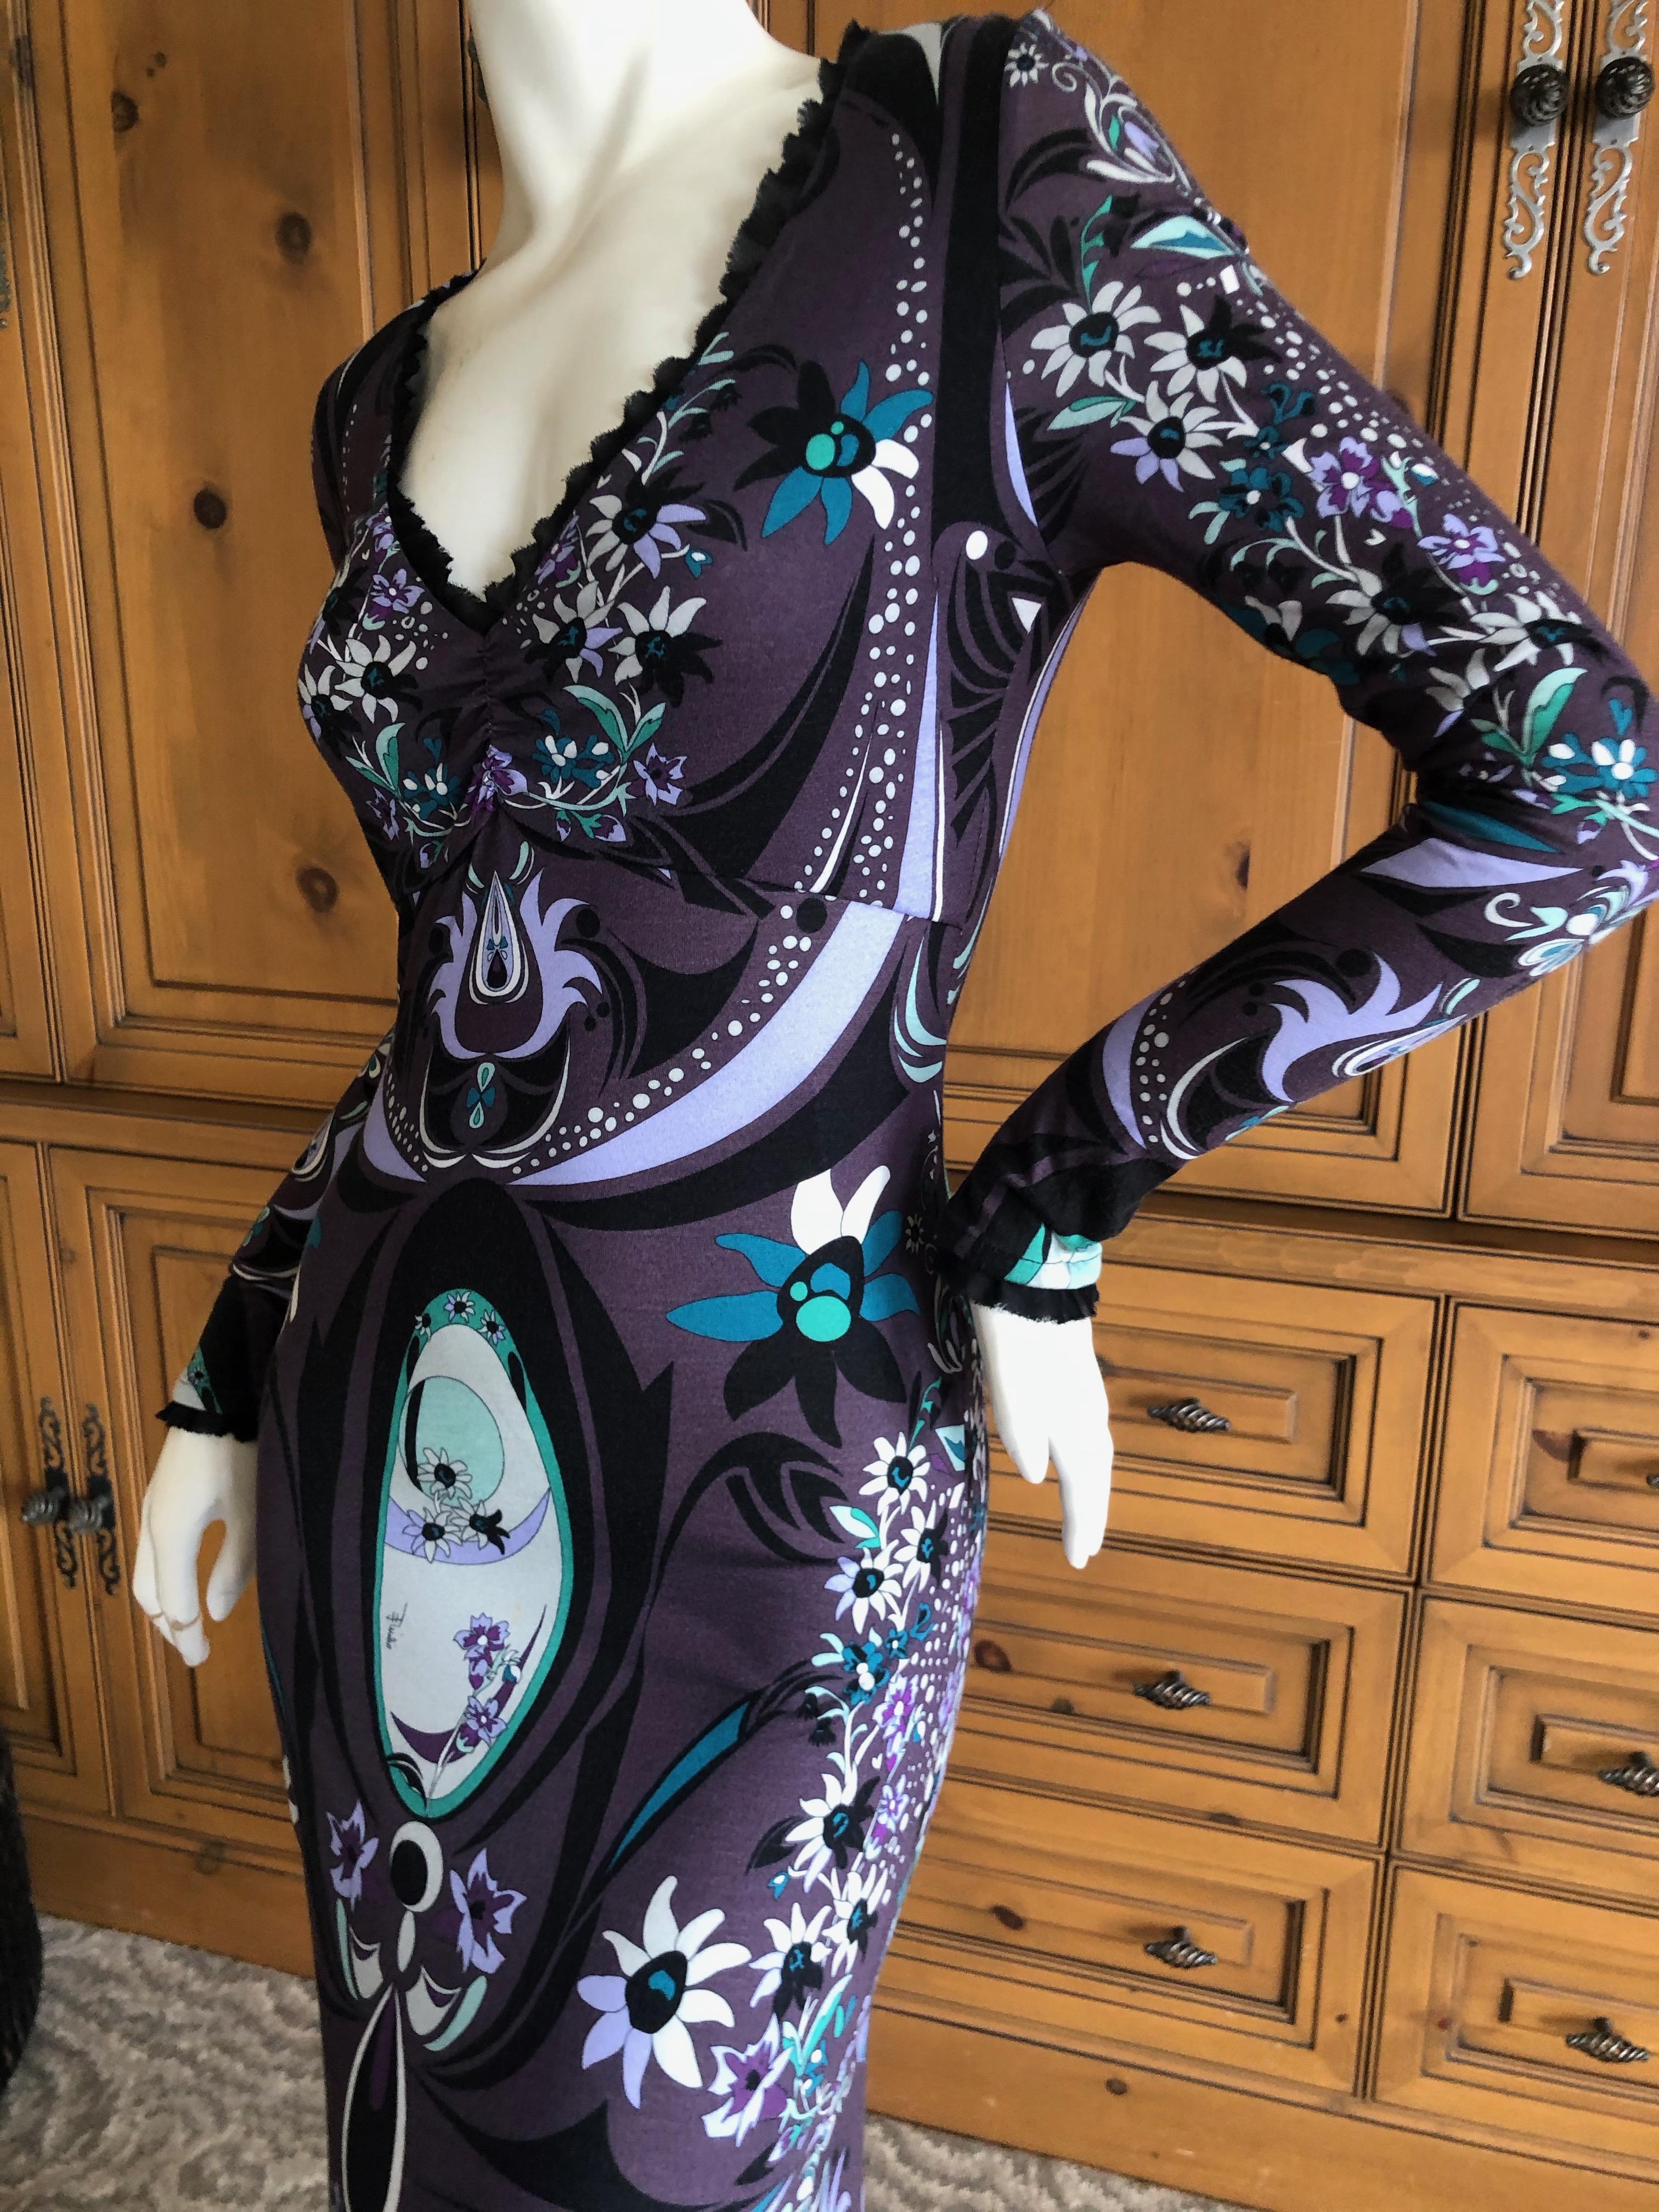 Emilio Pucci Beautiful Low Cut Evening Dress with Lace Trim
Size 6
 Bust 36